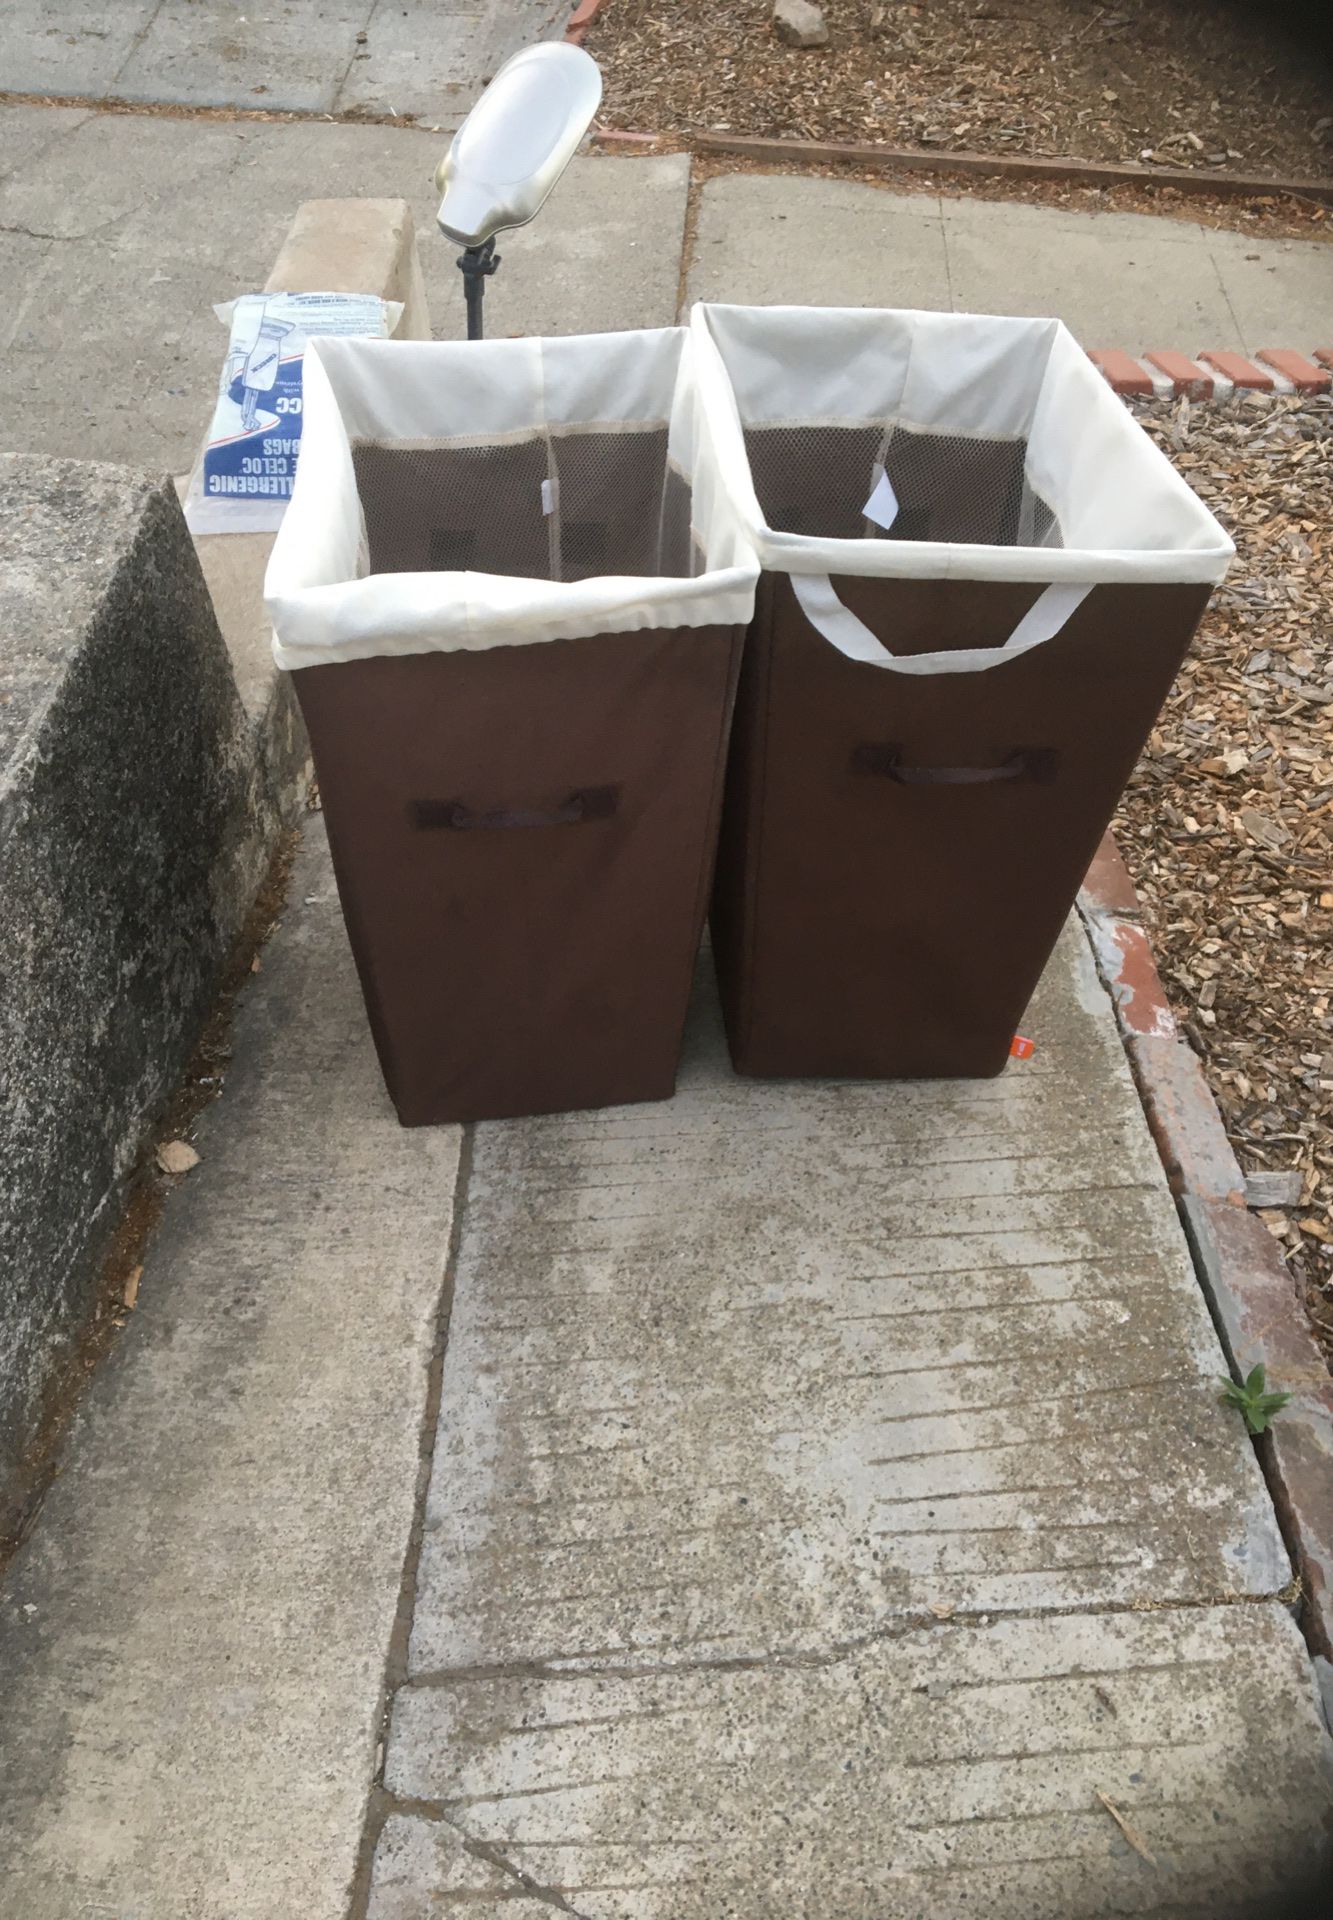 2 hampers on driveway for pickup 1504 Pine Street Martinez